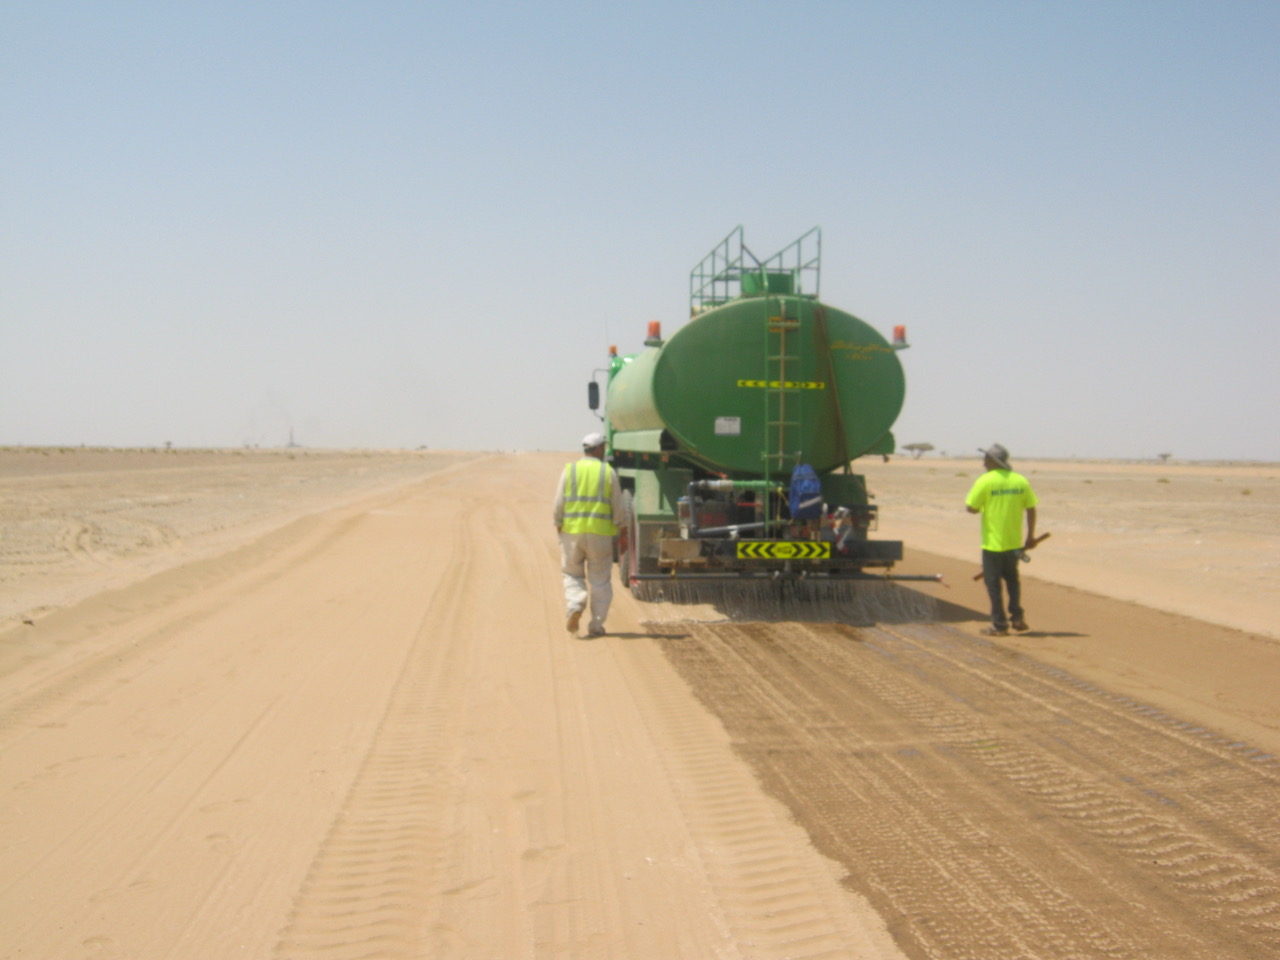 Dustless road maintenance and building dust control